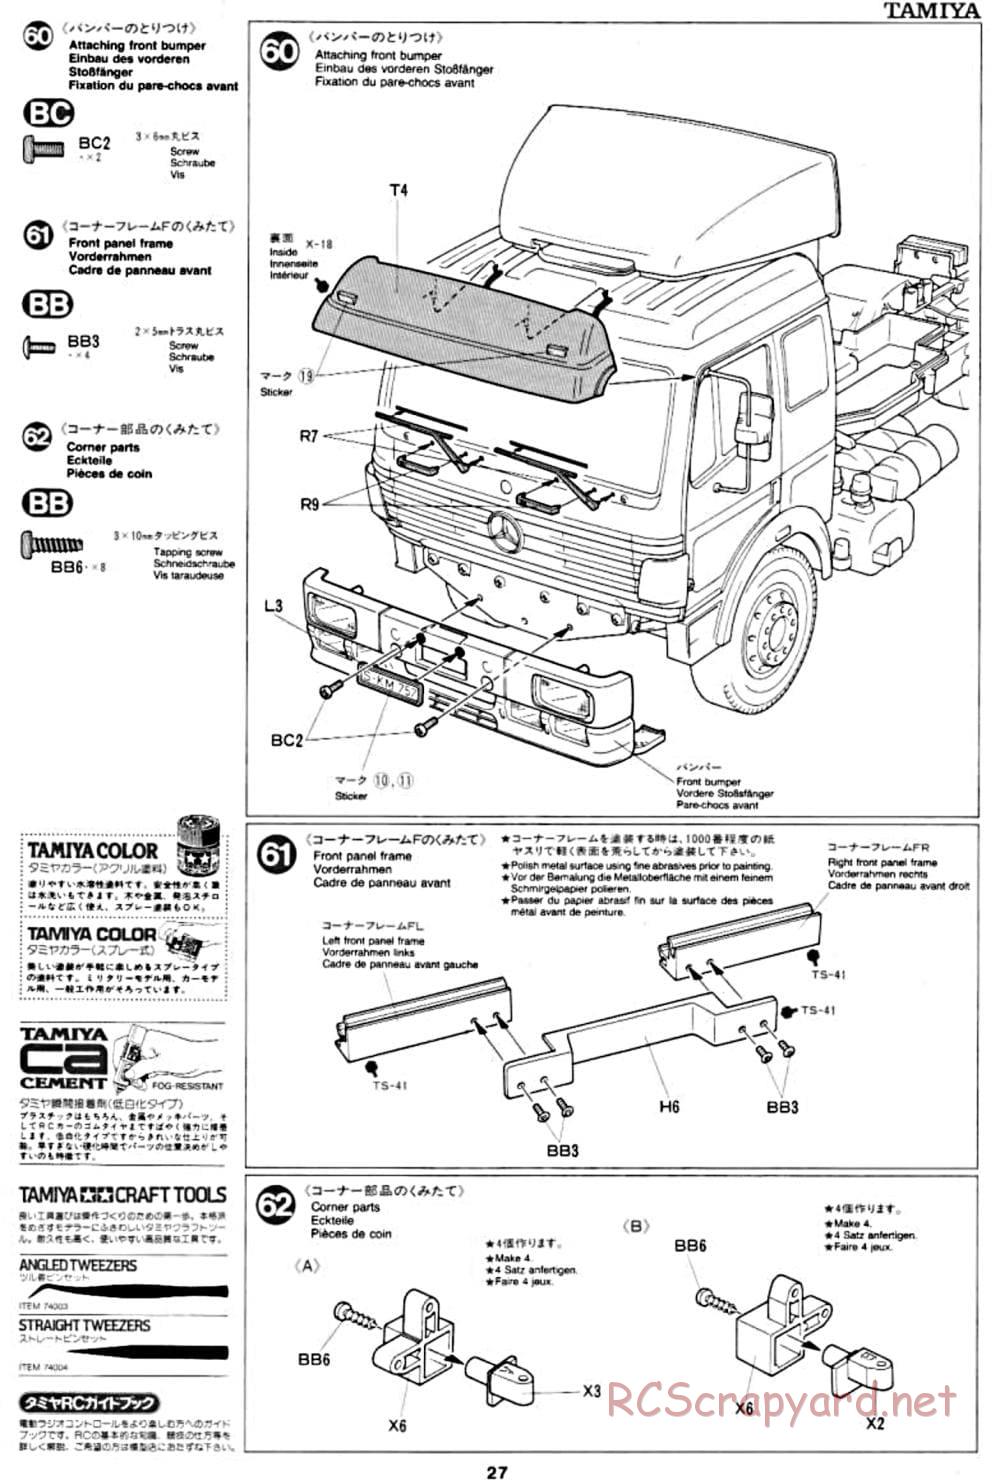 Tamiya - Mercedes-Benz 1850L Delivery Truck - Manual - Page 27